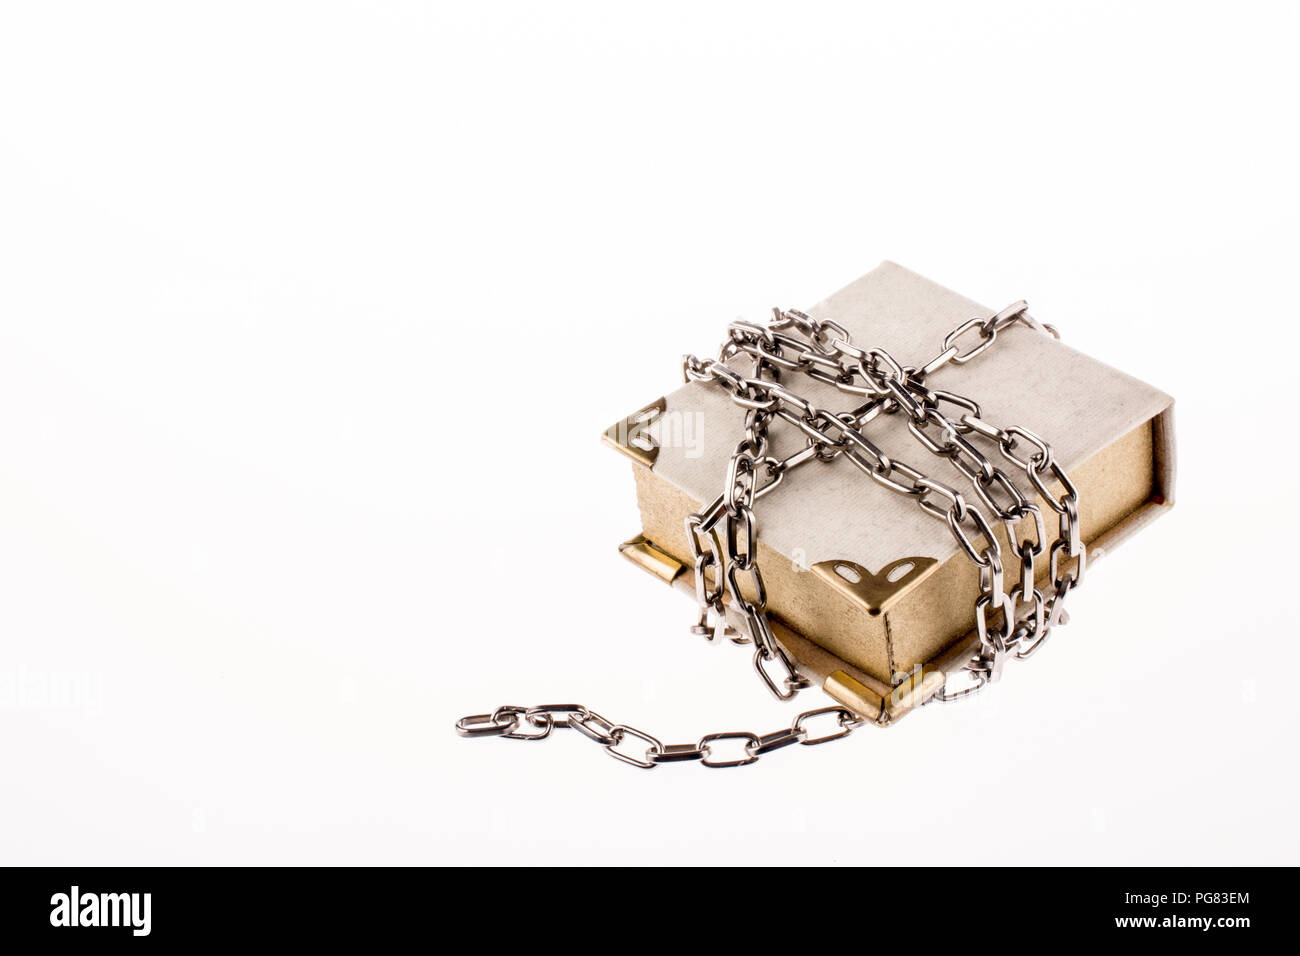 Chained book on white background Stock Photo